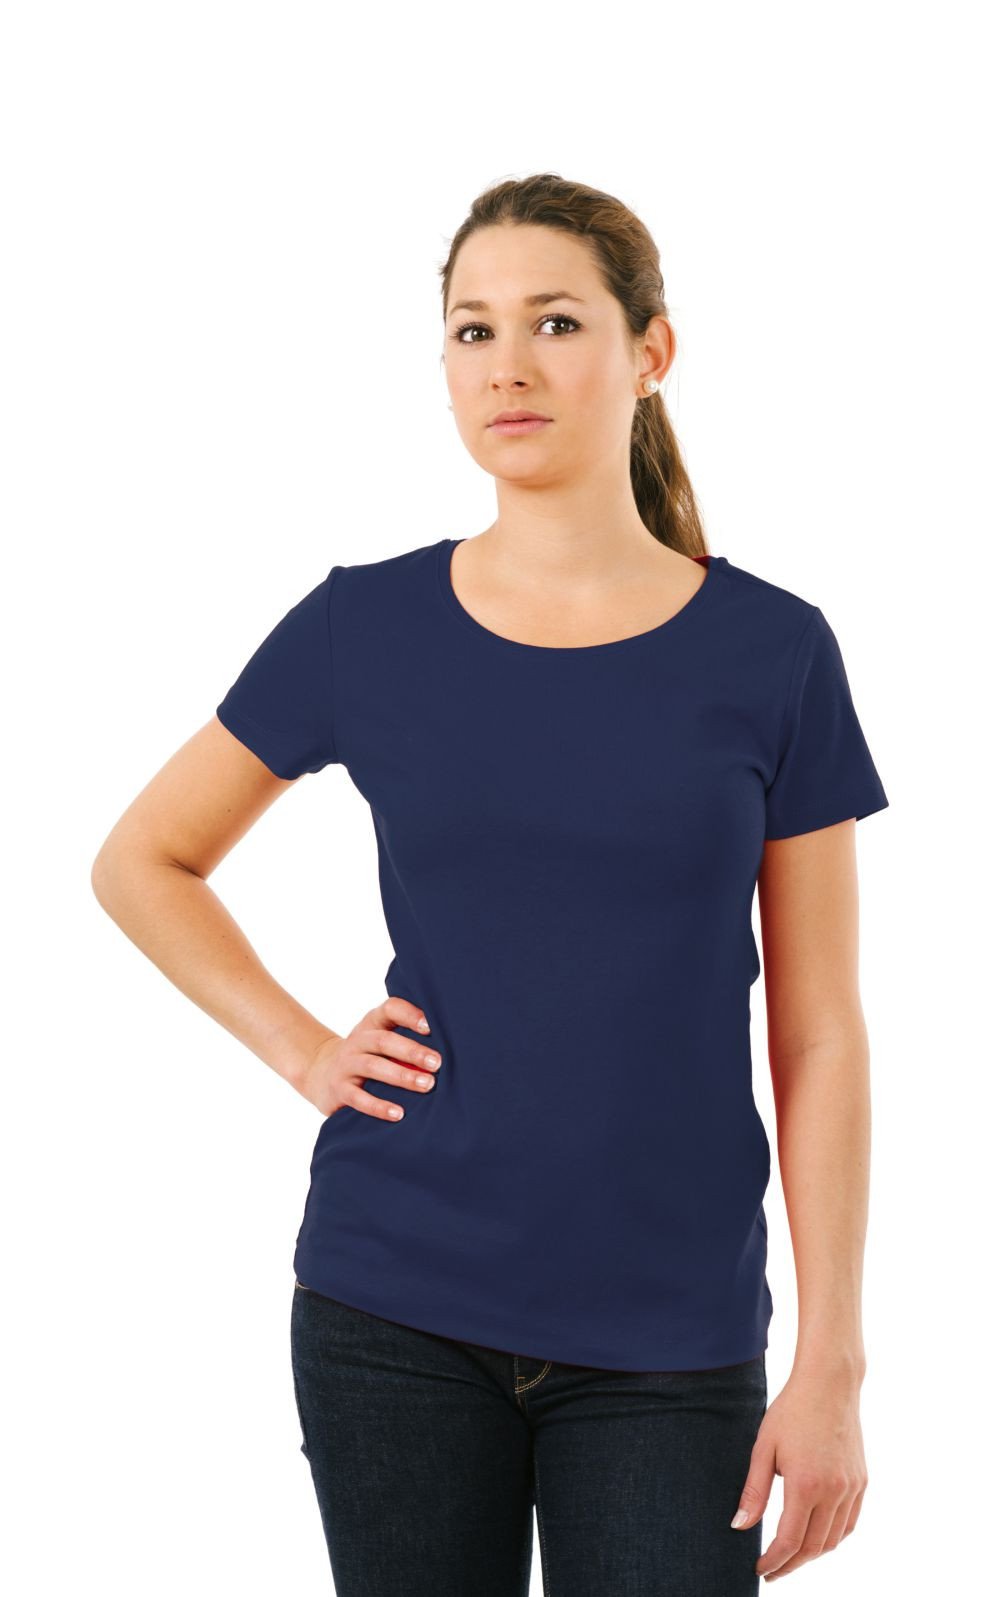 DOUBLE F ROUND NECK HALF SLEEVE NAVY BLUE COLOR PLAIN T-SHIRT FOR WOMEN